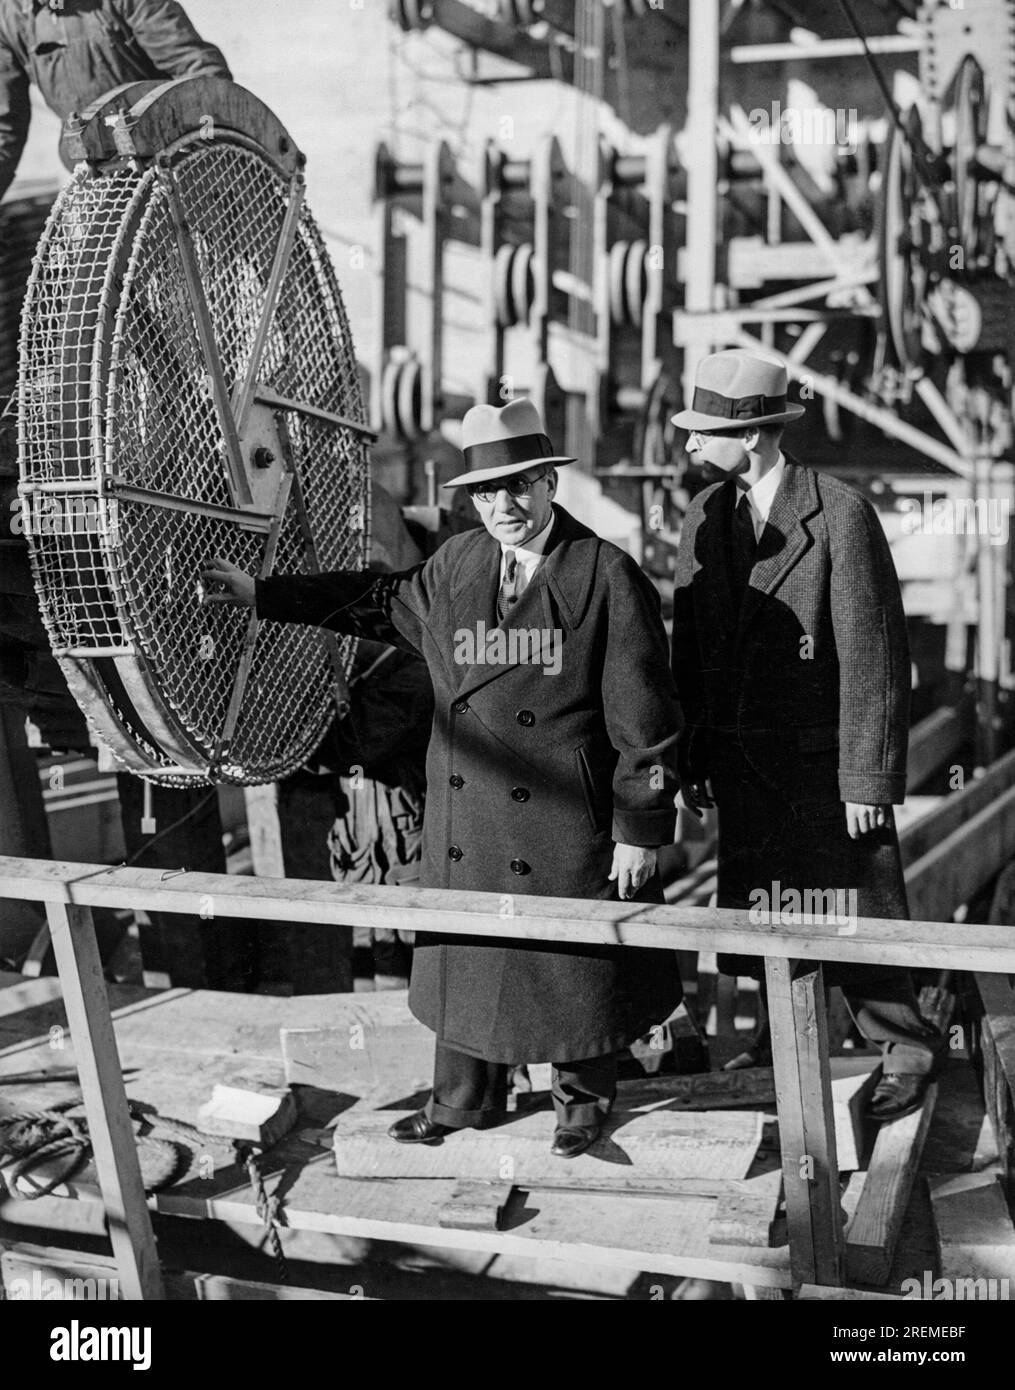 San Francisco, California:   1935 Chief Engineer and builder of the Golden Gate Bridge, Joseph Strauss, and Assistant Chief Engineer William Payne, discuss the details of the bridge as the first string of wire was released and sent out across the space where the bridge will be built. Stock Photo